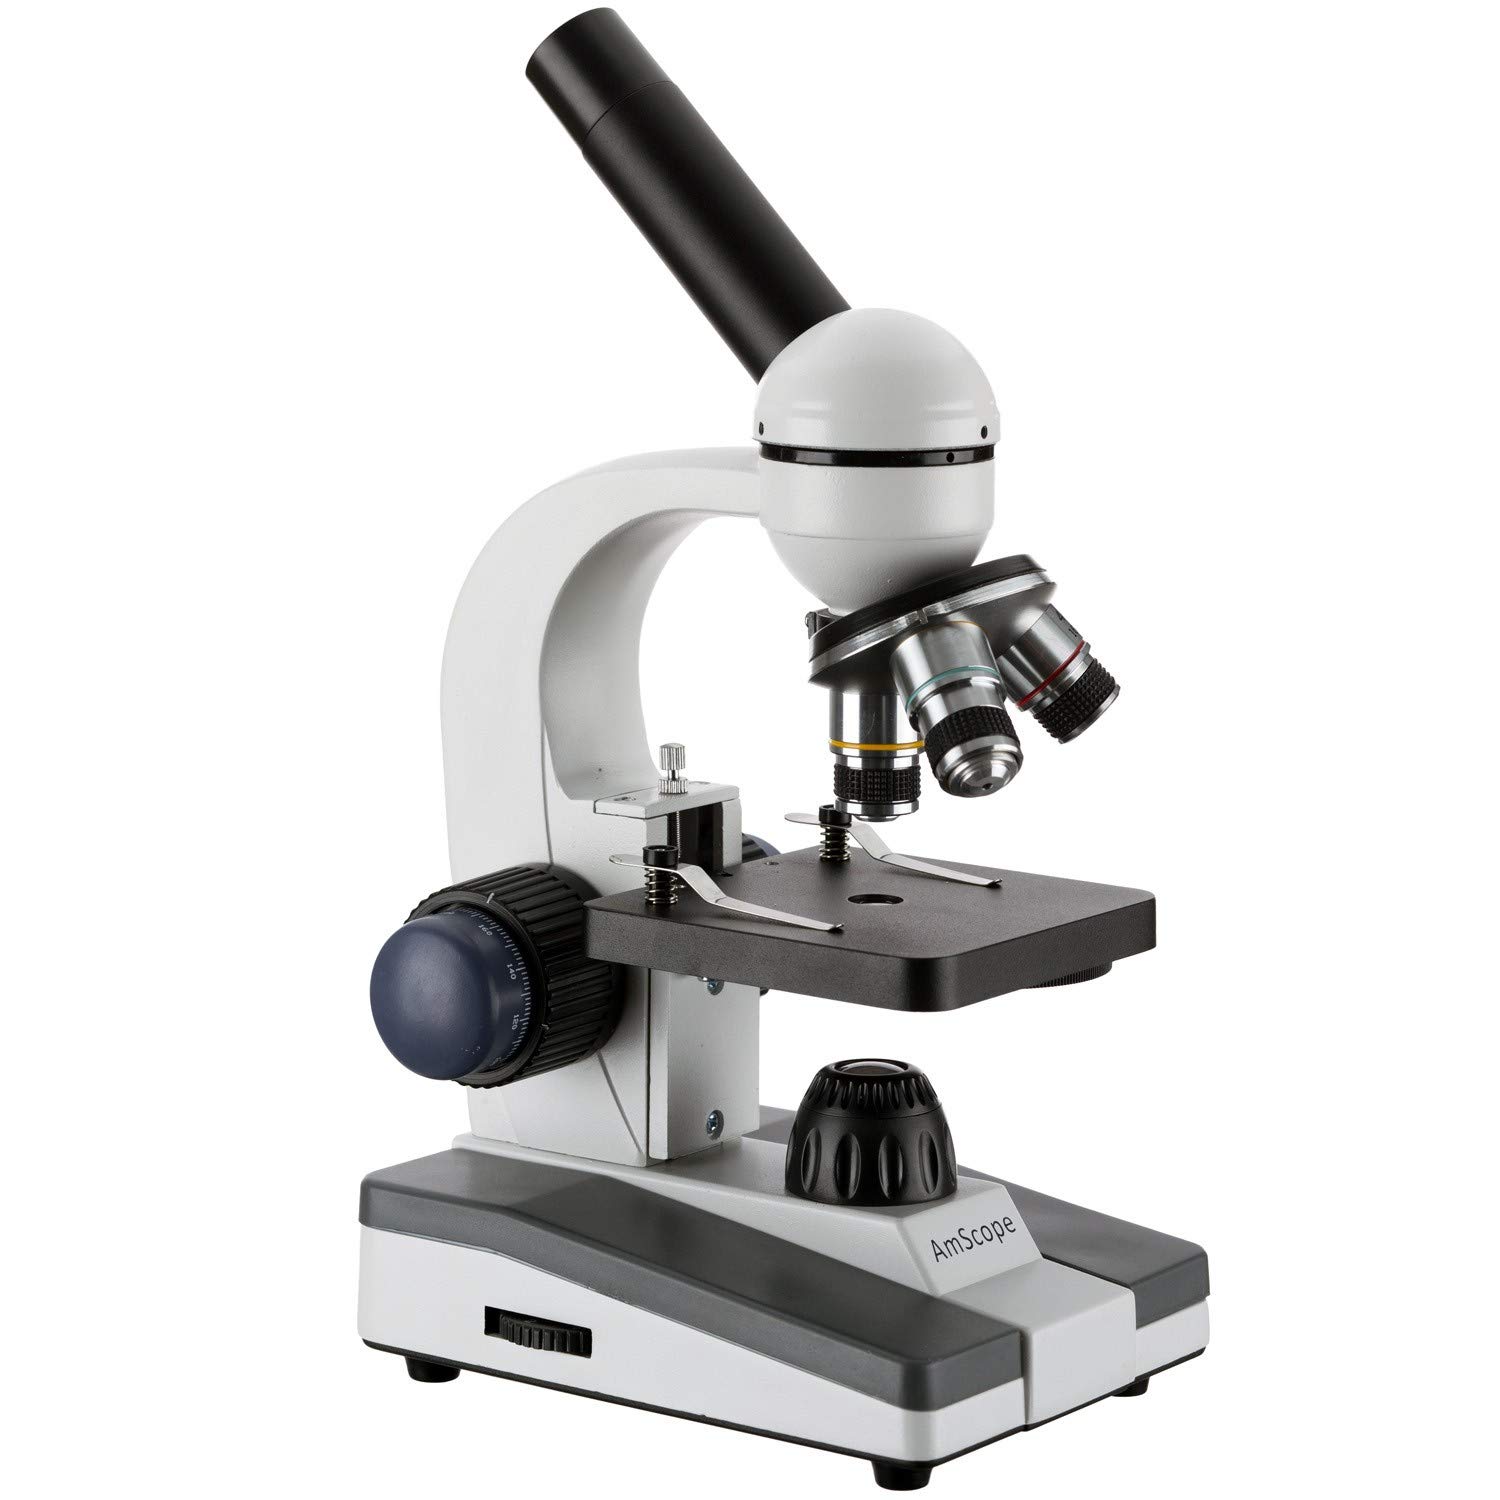 Top 10 Best Microscope for Kids Reviews in 2023 7